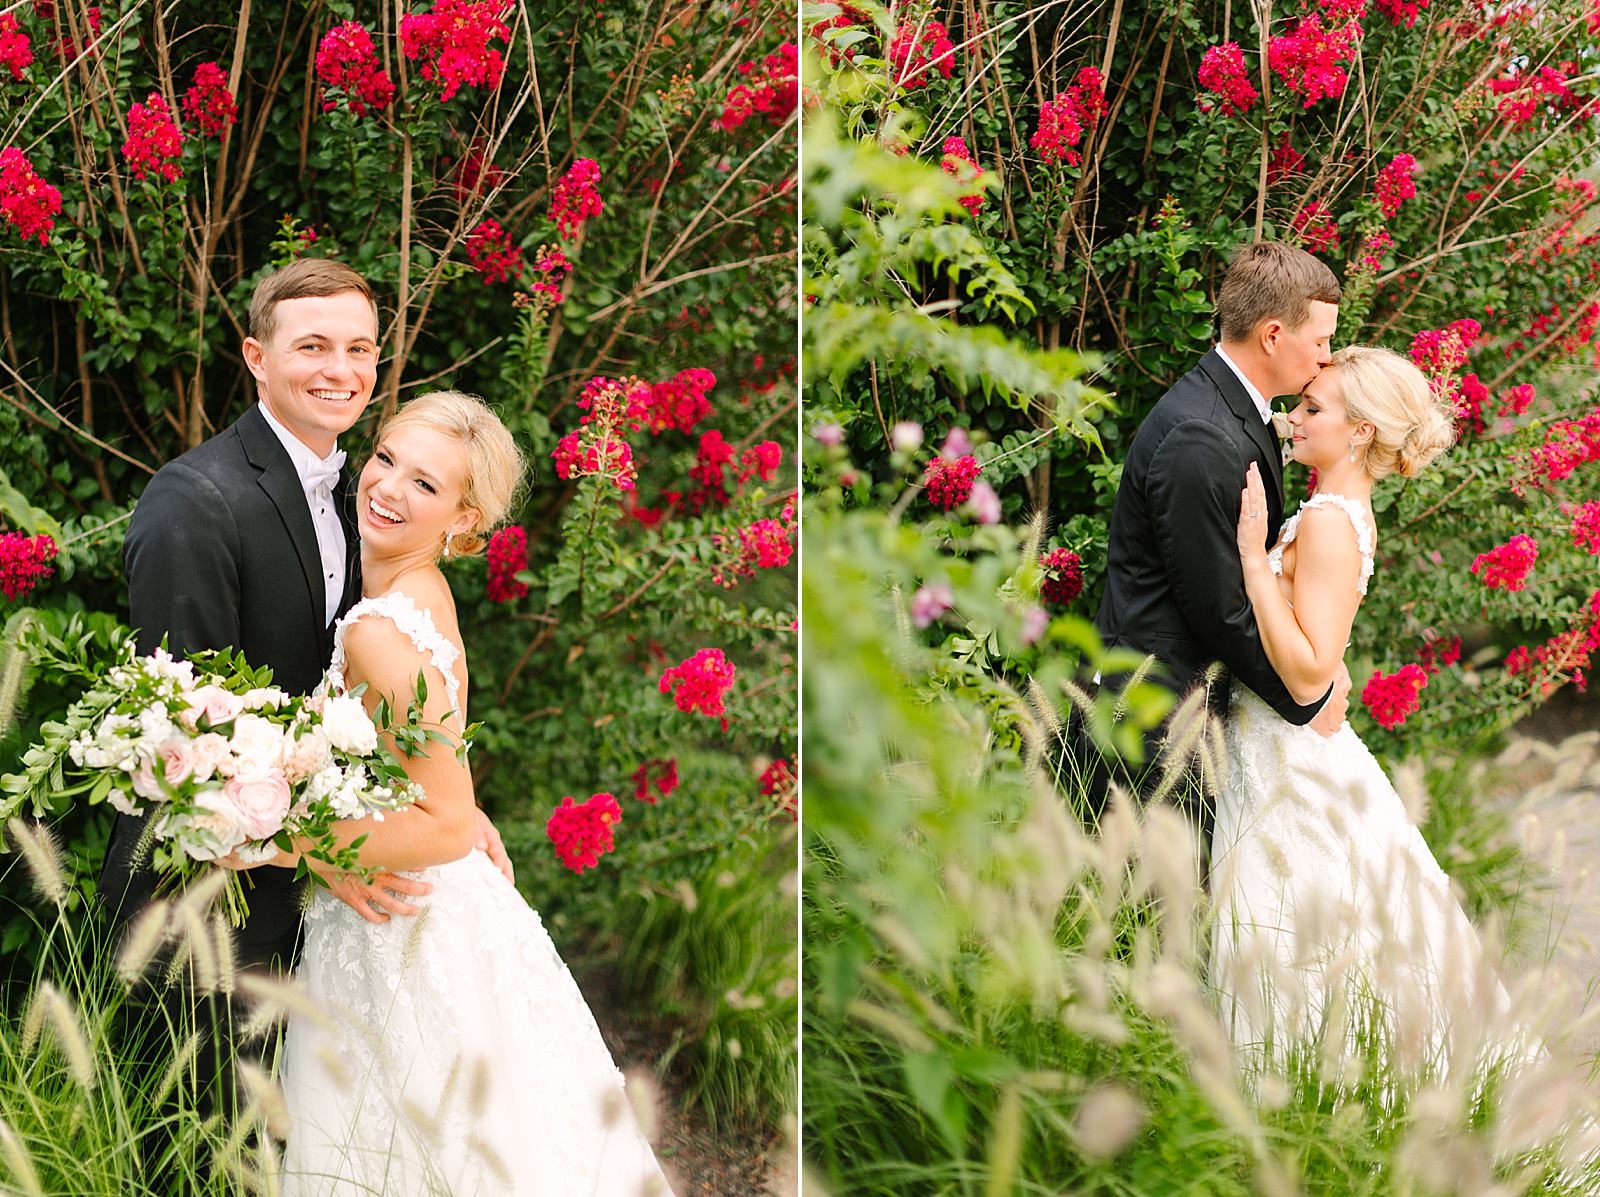  An Evansville Country Club Wedding Kelsi and Andrew191.jpg